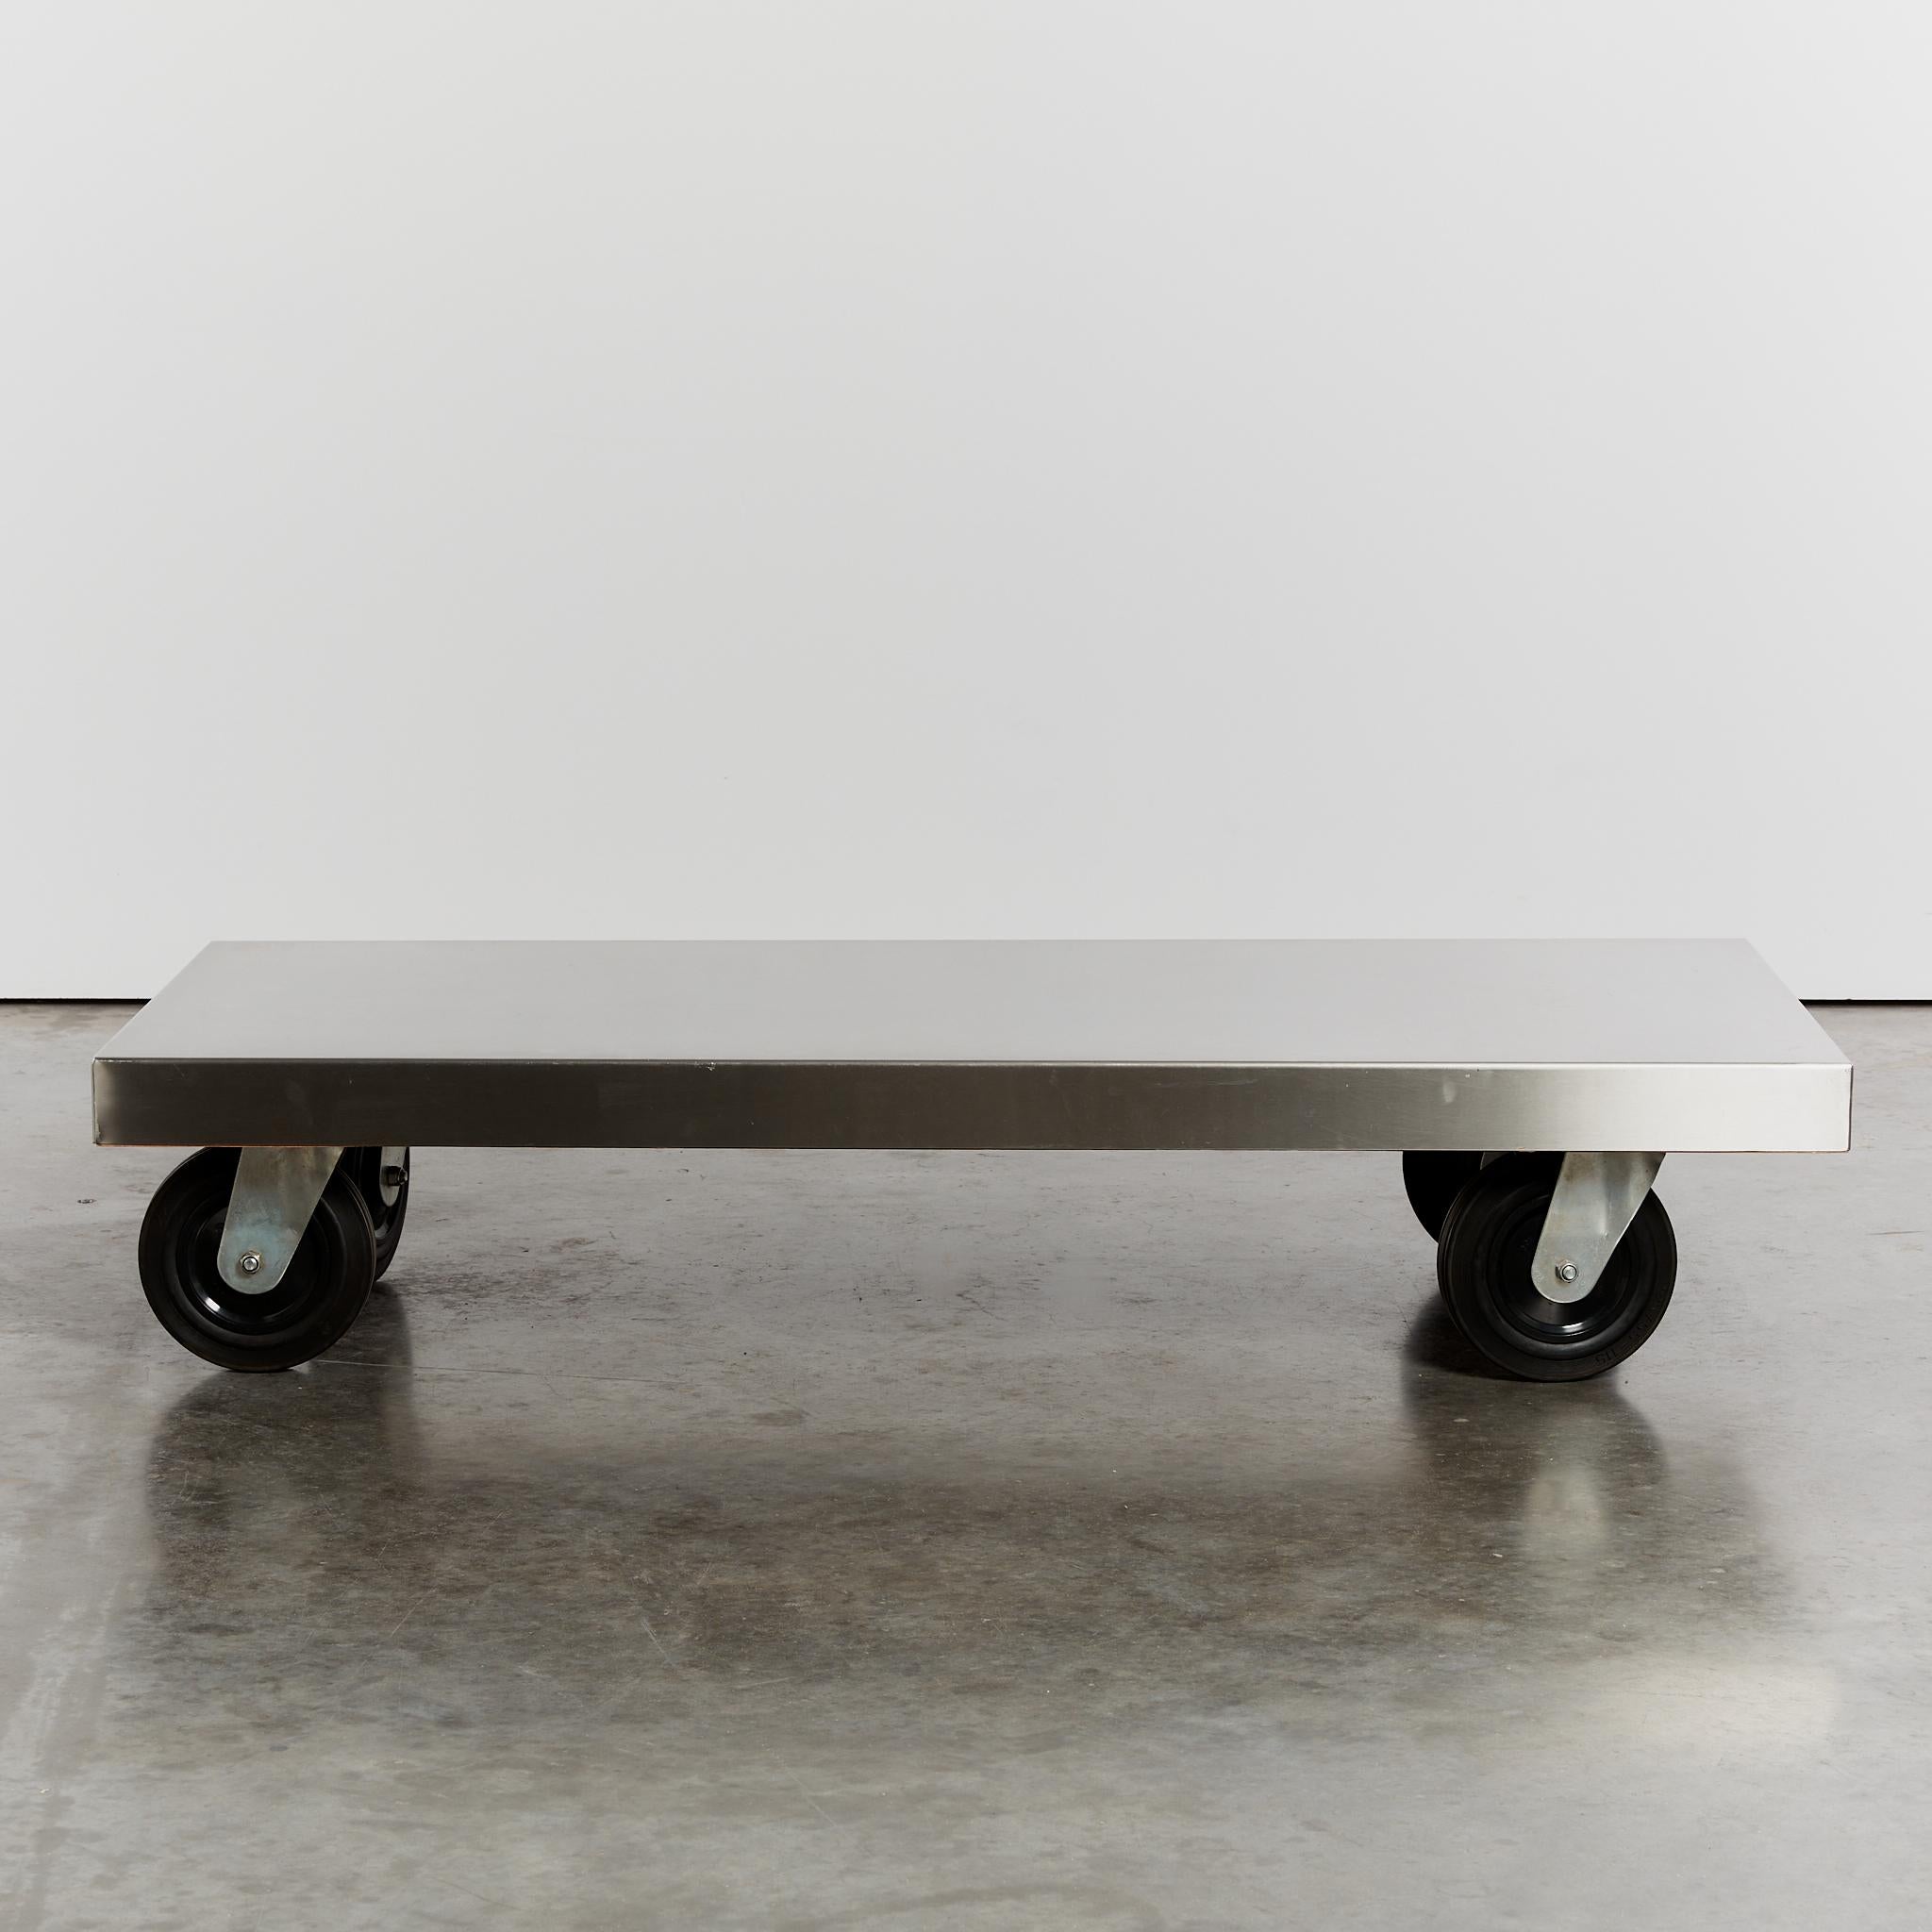 Oversized flat stainless steel coffee table on large black castors.

Material: Stainless steel

Period: Circa 1990's

Origin: Netherlands

Dimensions:  L160 x W75 x H32cm

Condition: Vintage condition - a few subtle signs of wear on the surface,